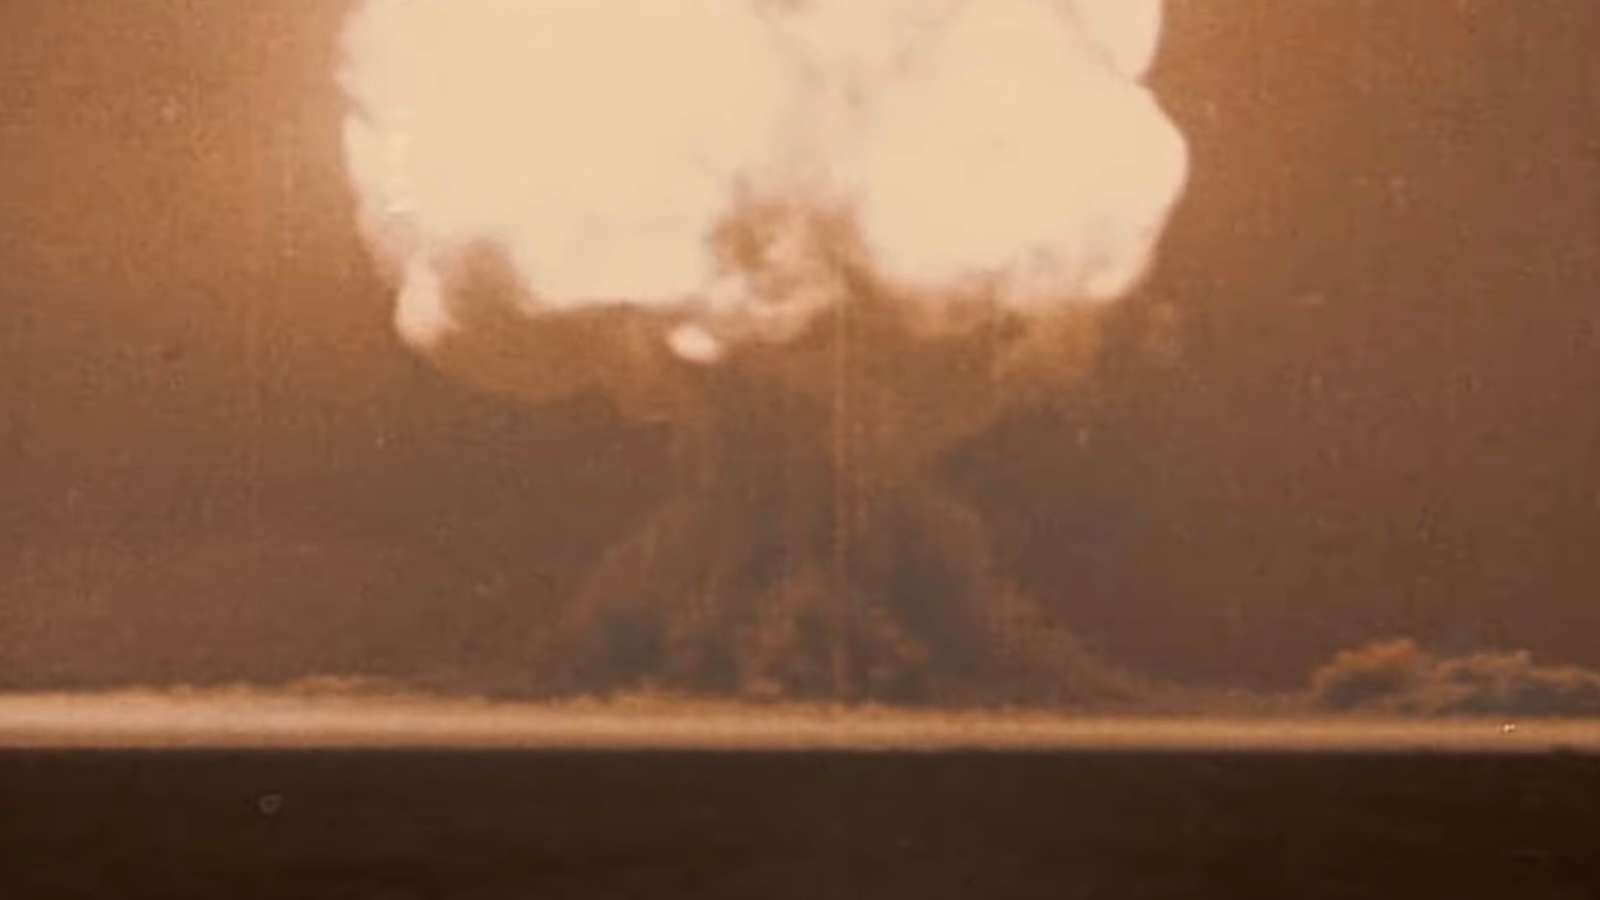 Footage of nuclear explosion shown in Turning Point